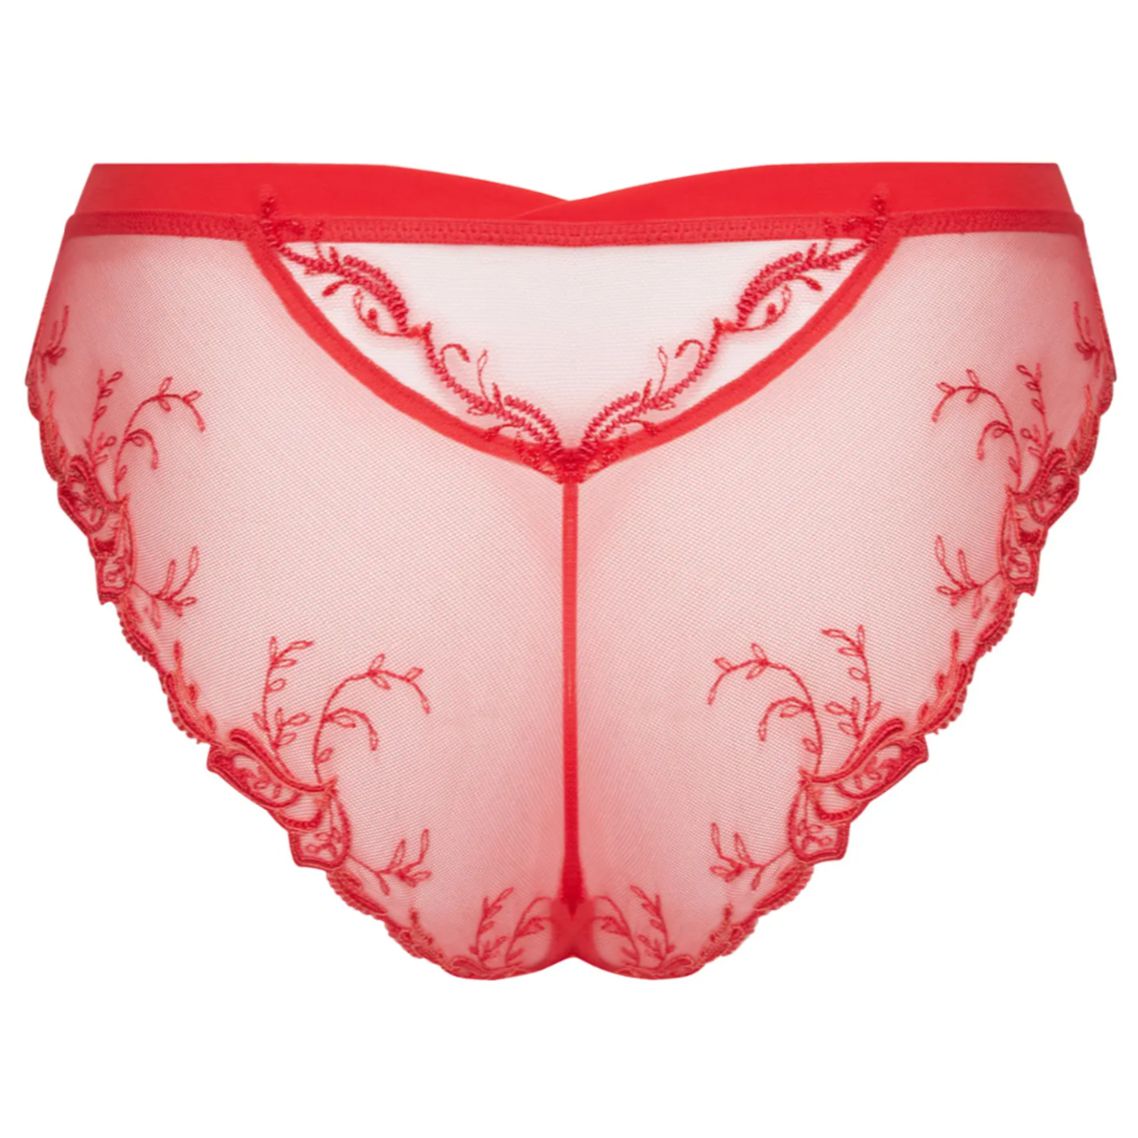 Lise Charmel Source Beaute Italian Brief ACH0772-Panties-Lise Charmel-Hibiscus-XSmall-Anna Bella Fine Lingerie, Reveal Your Most Gorgeous Self!